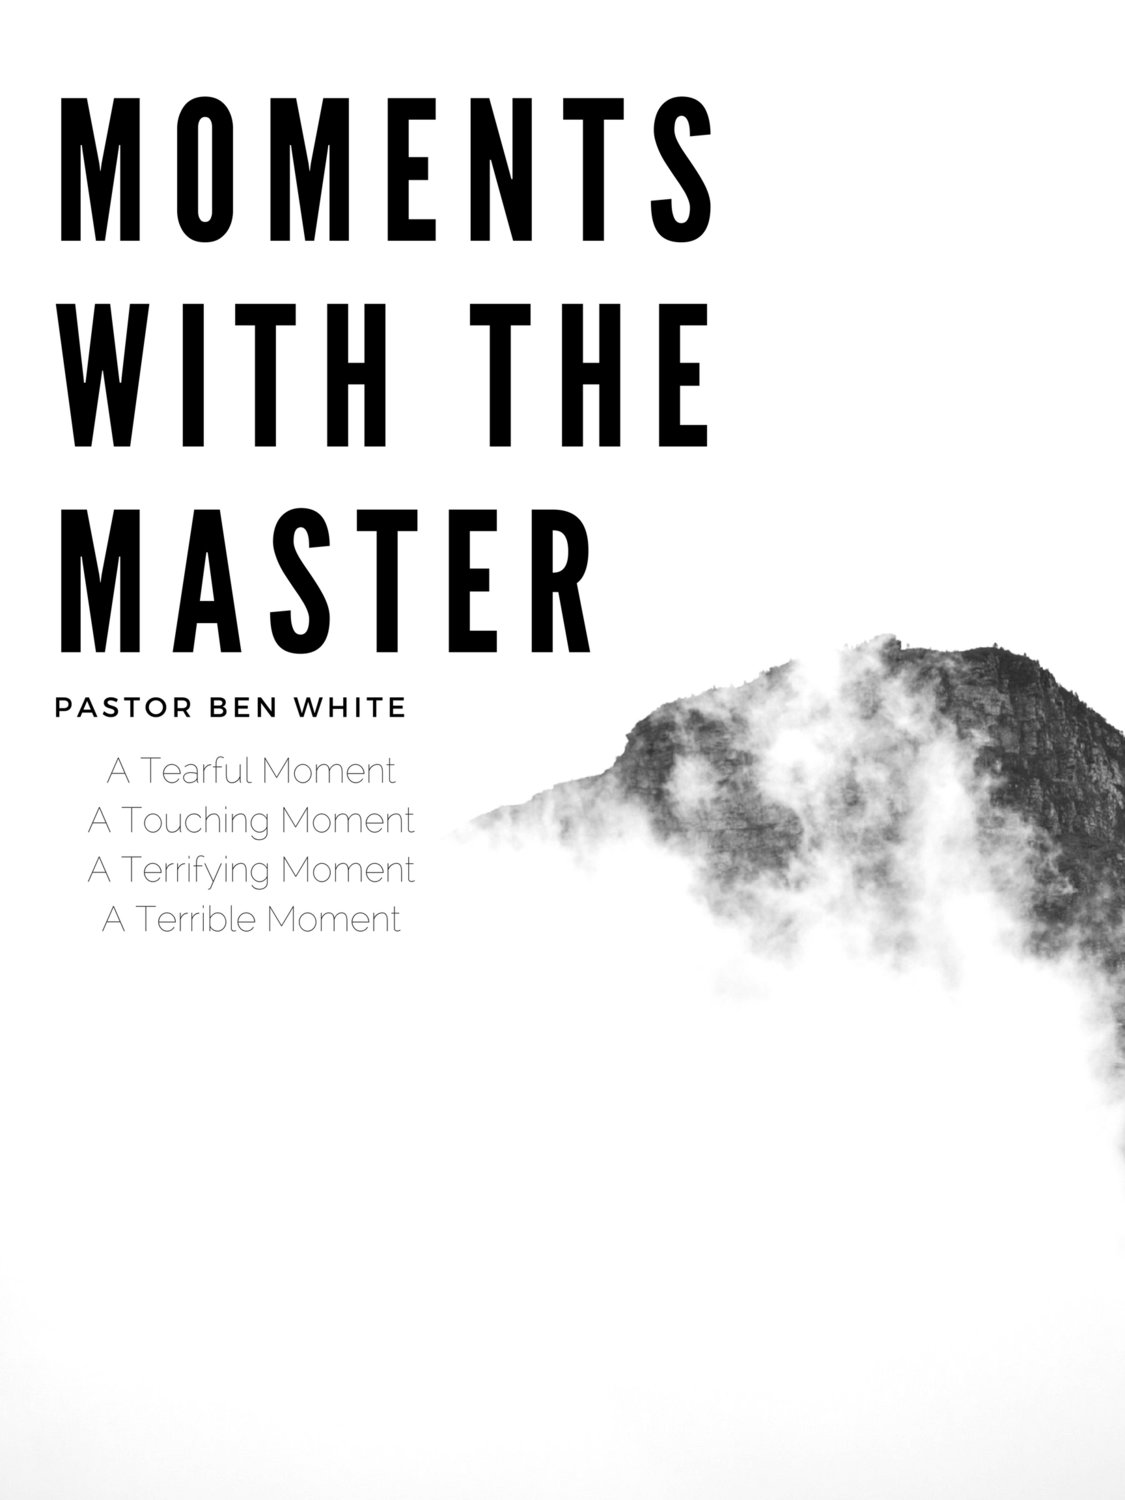 Moments With The Master Series - Pastor Ben White (4 Sermons)